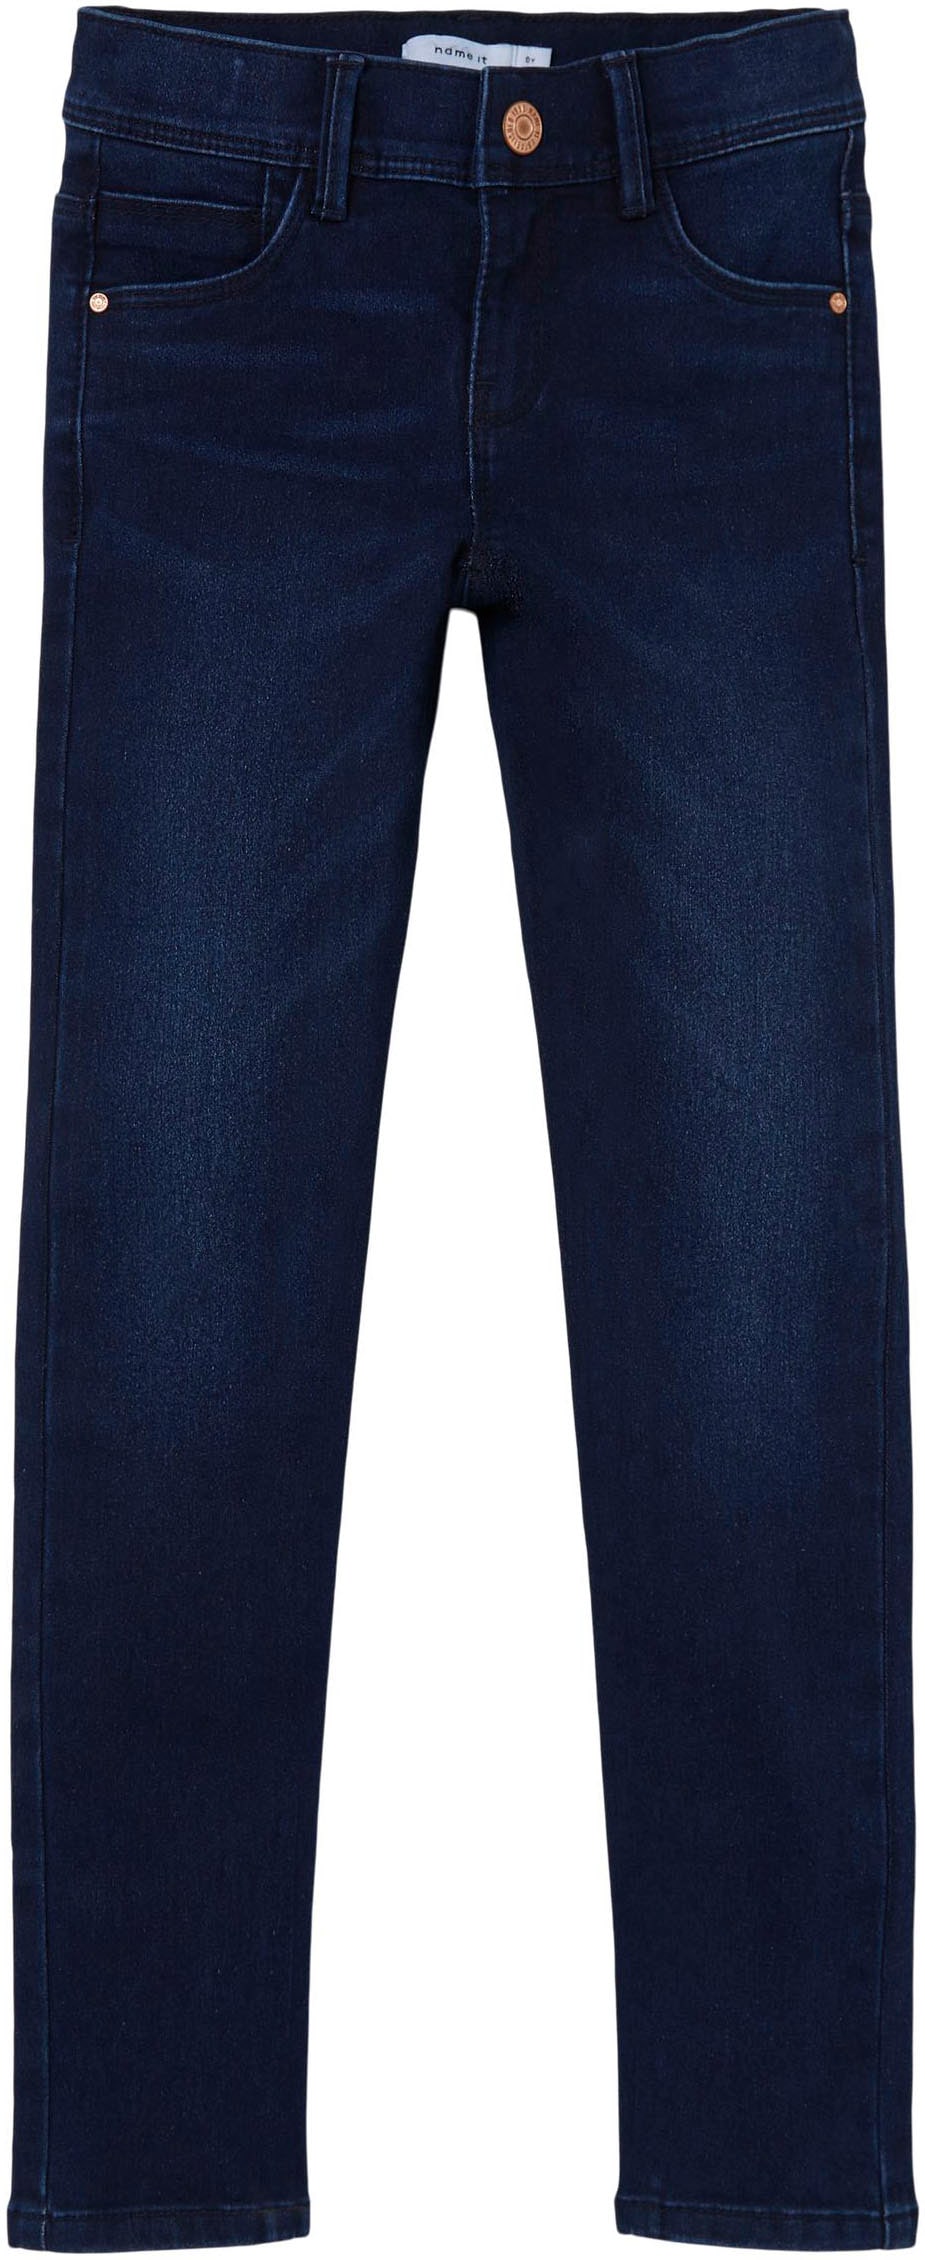 »NKFPOLLY bei PANT«, ♕ bequemem Stretch-Jeans DNMTAX aus Stretchdenim It Name